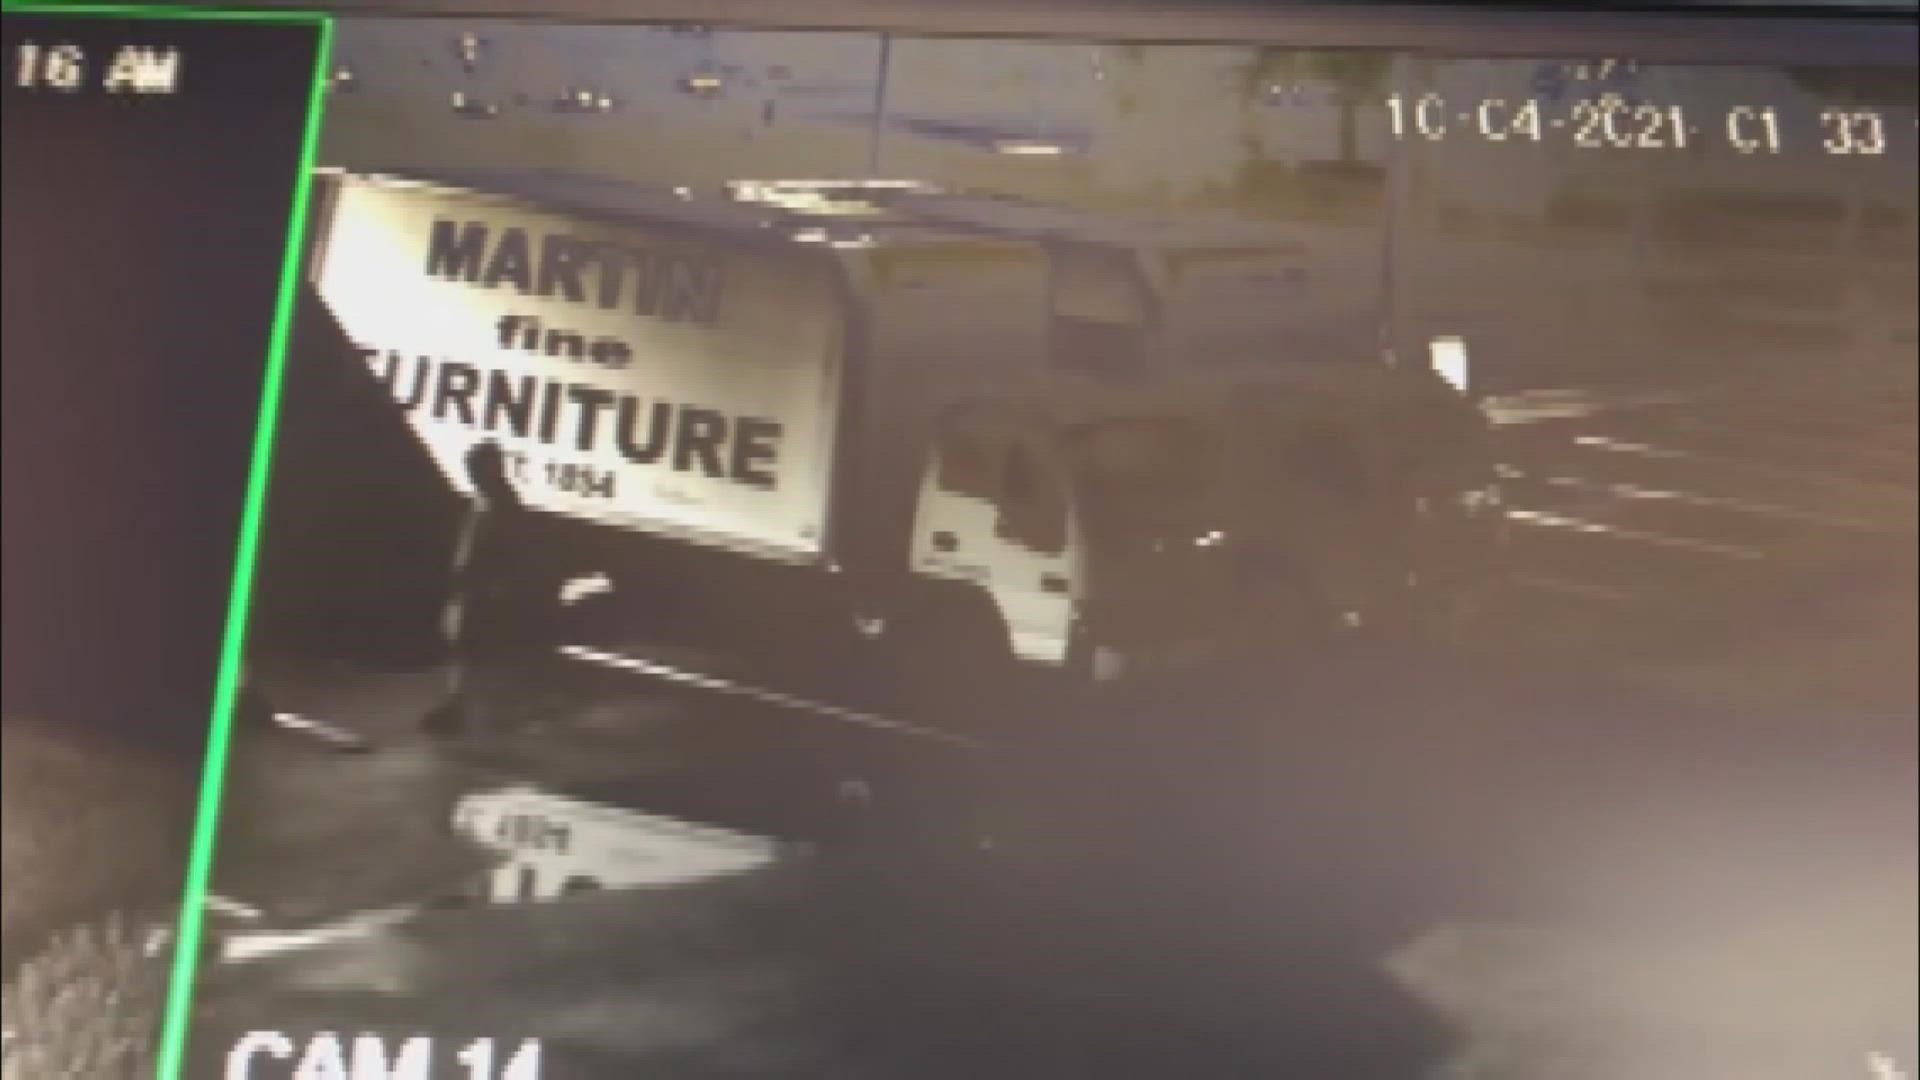 Martin Fine Furniture installed custom cages over its vehicles catalytic converters after a theft.